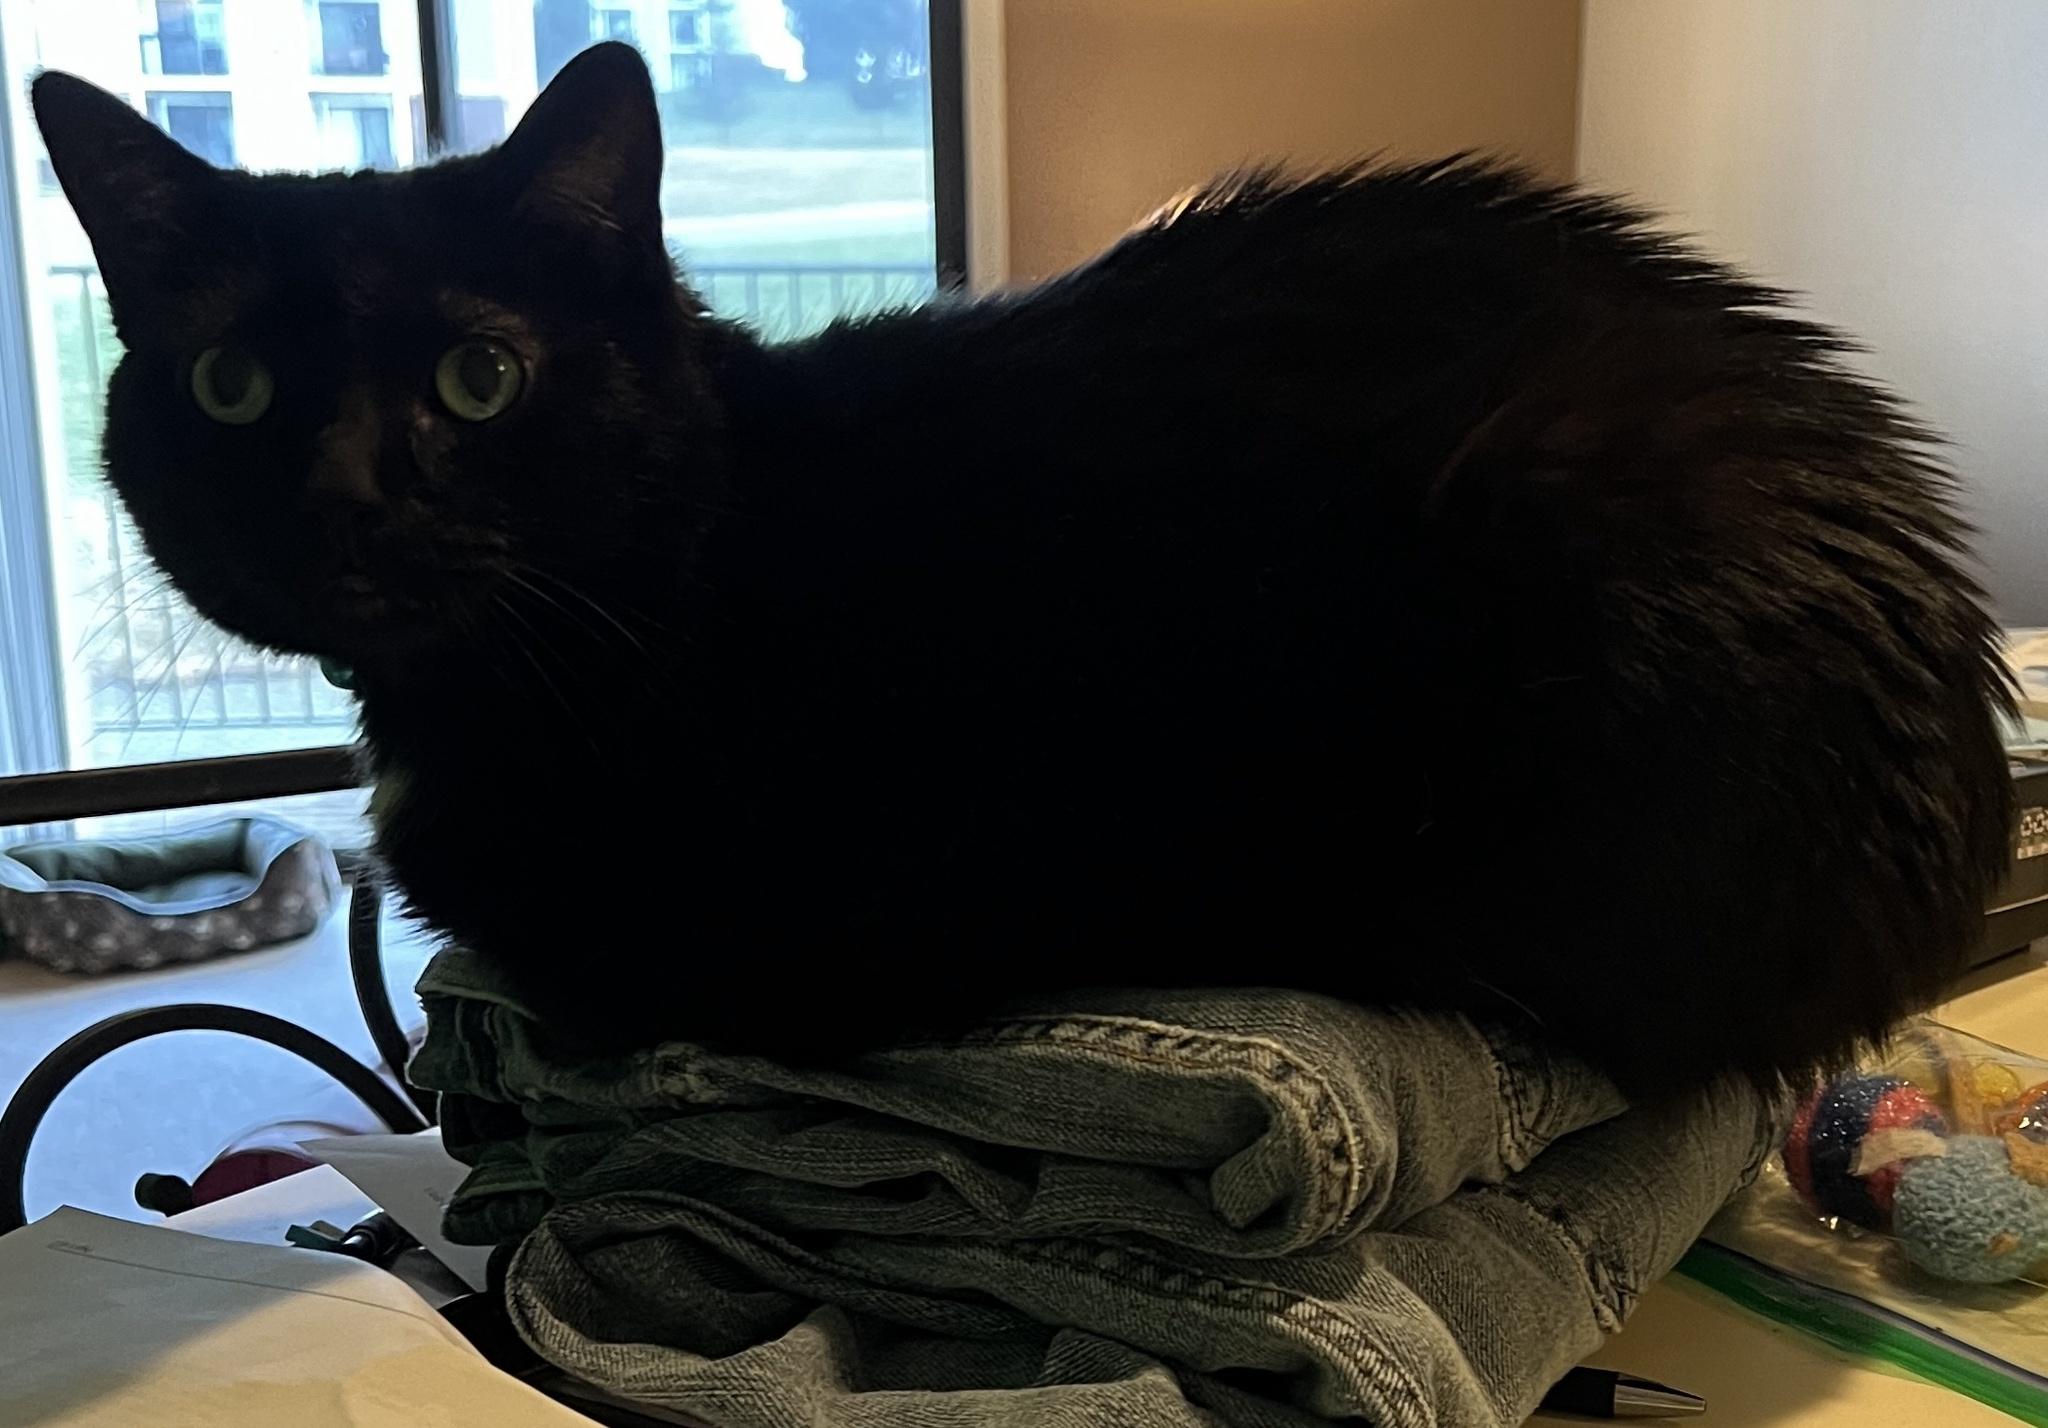 Cat on jeans